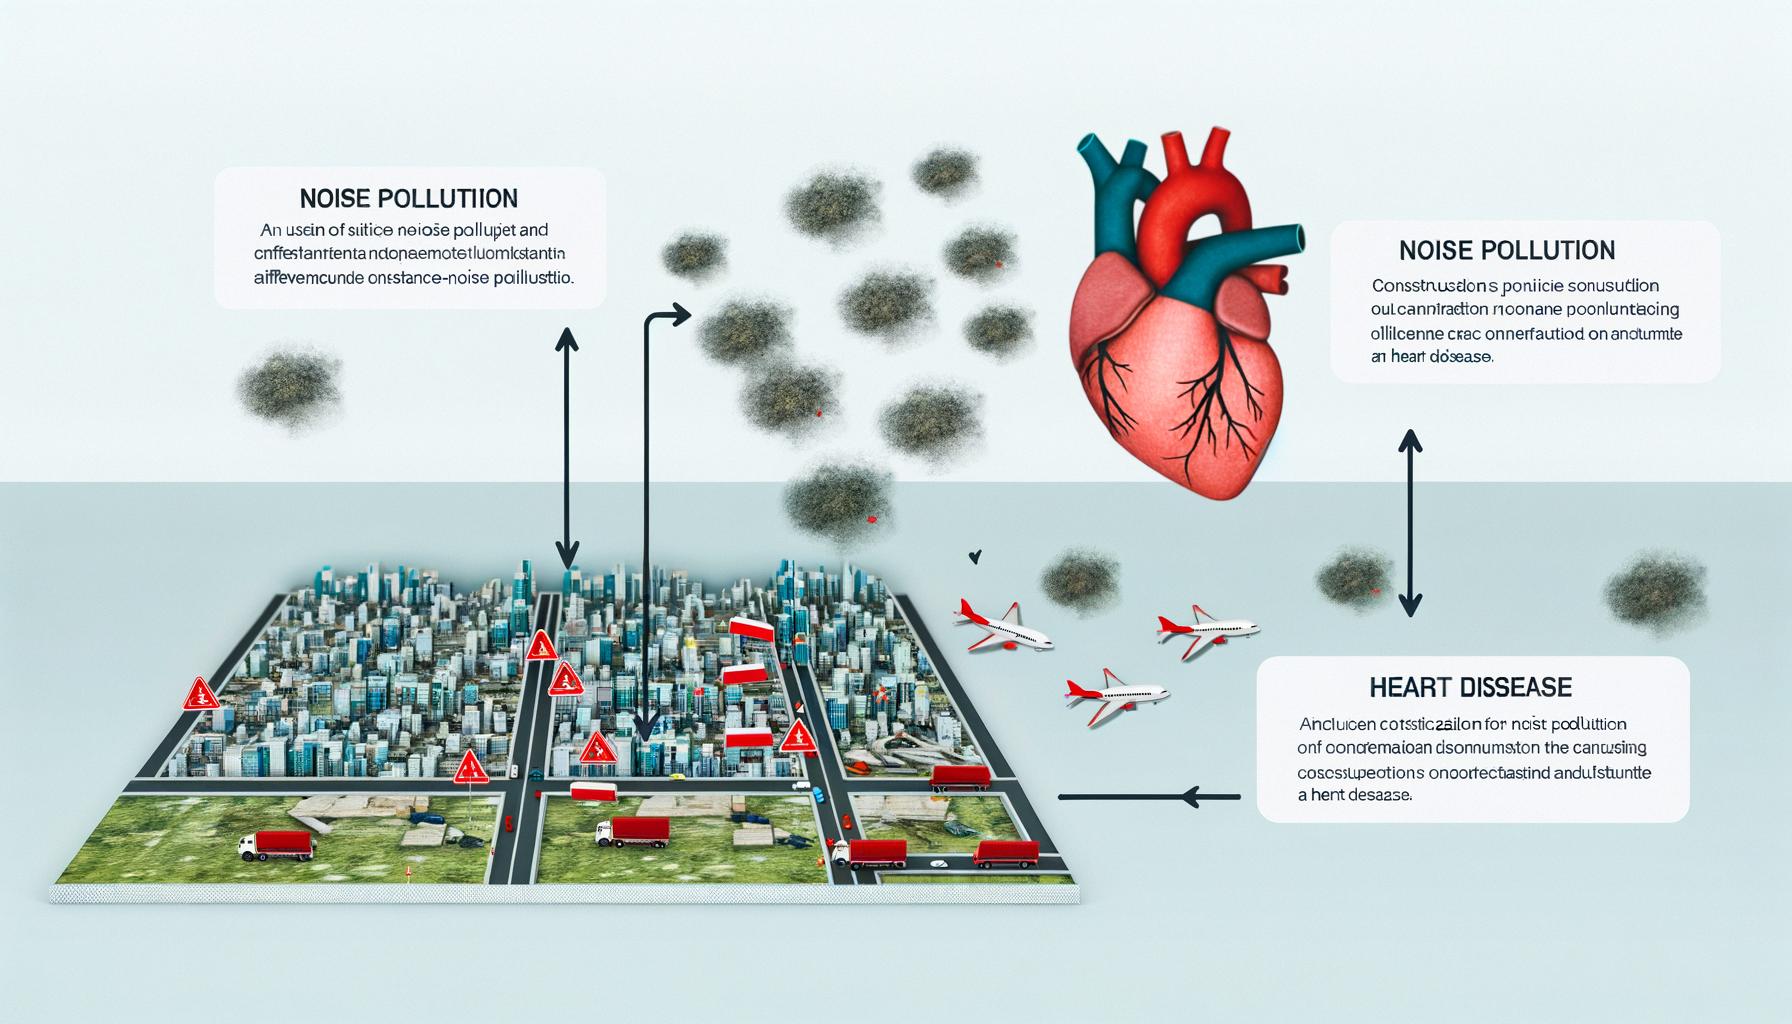 Noise pollution significantly impacts heart disease risk